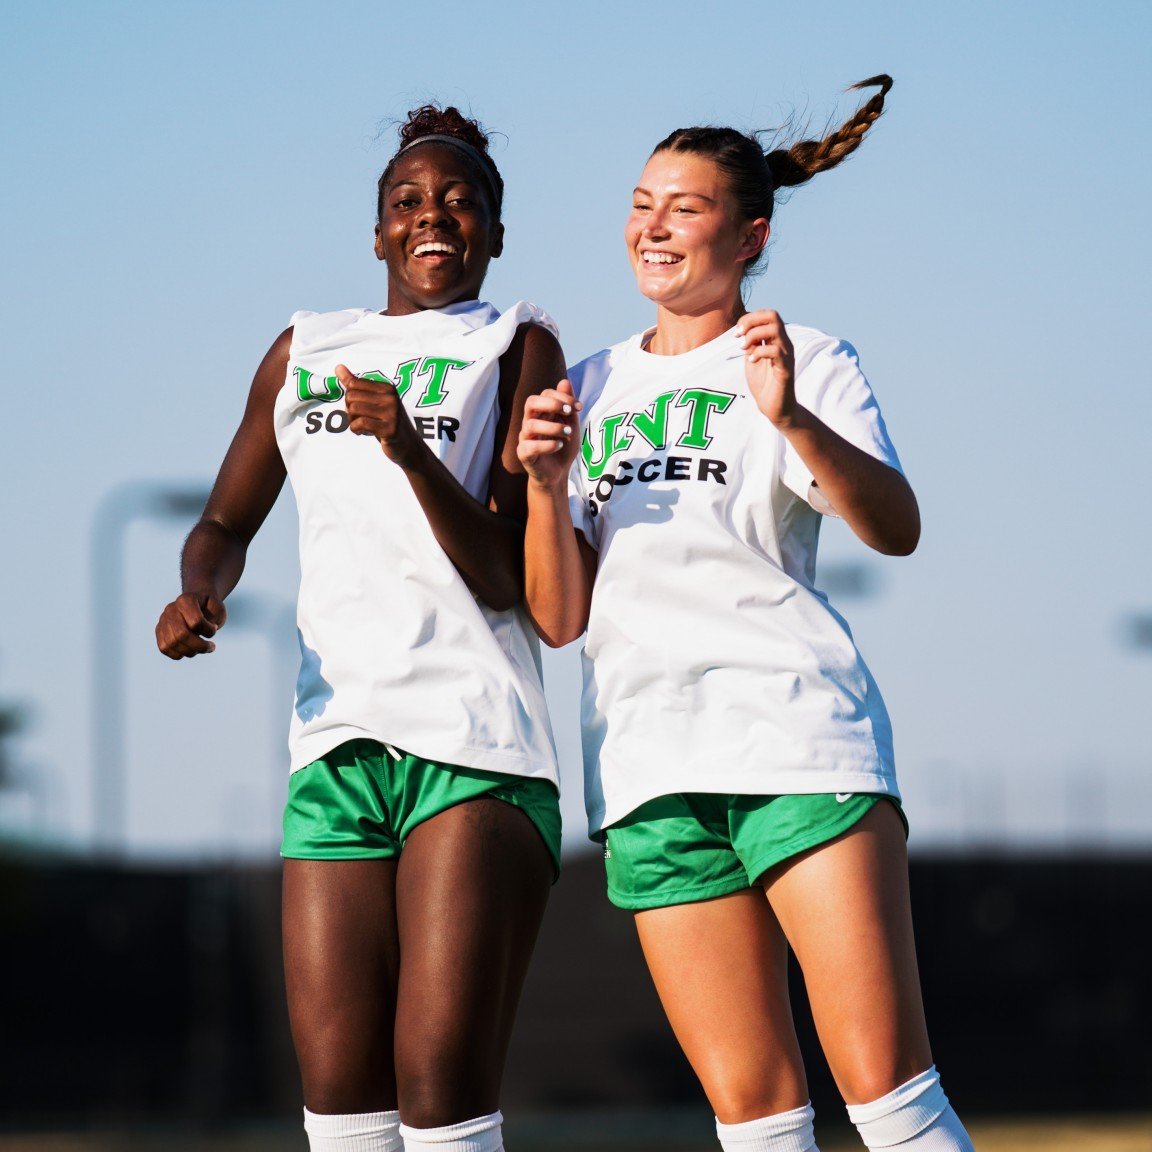 MeanGreenSoccer tweet picture